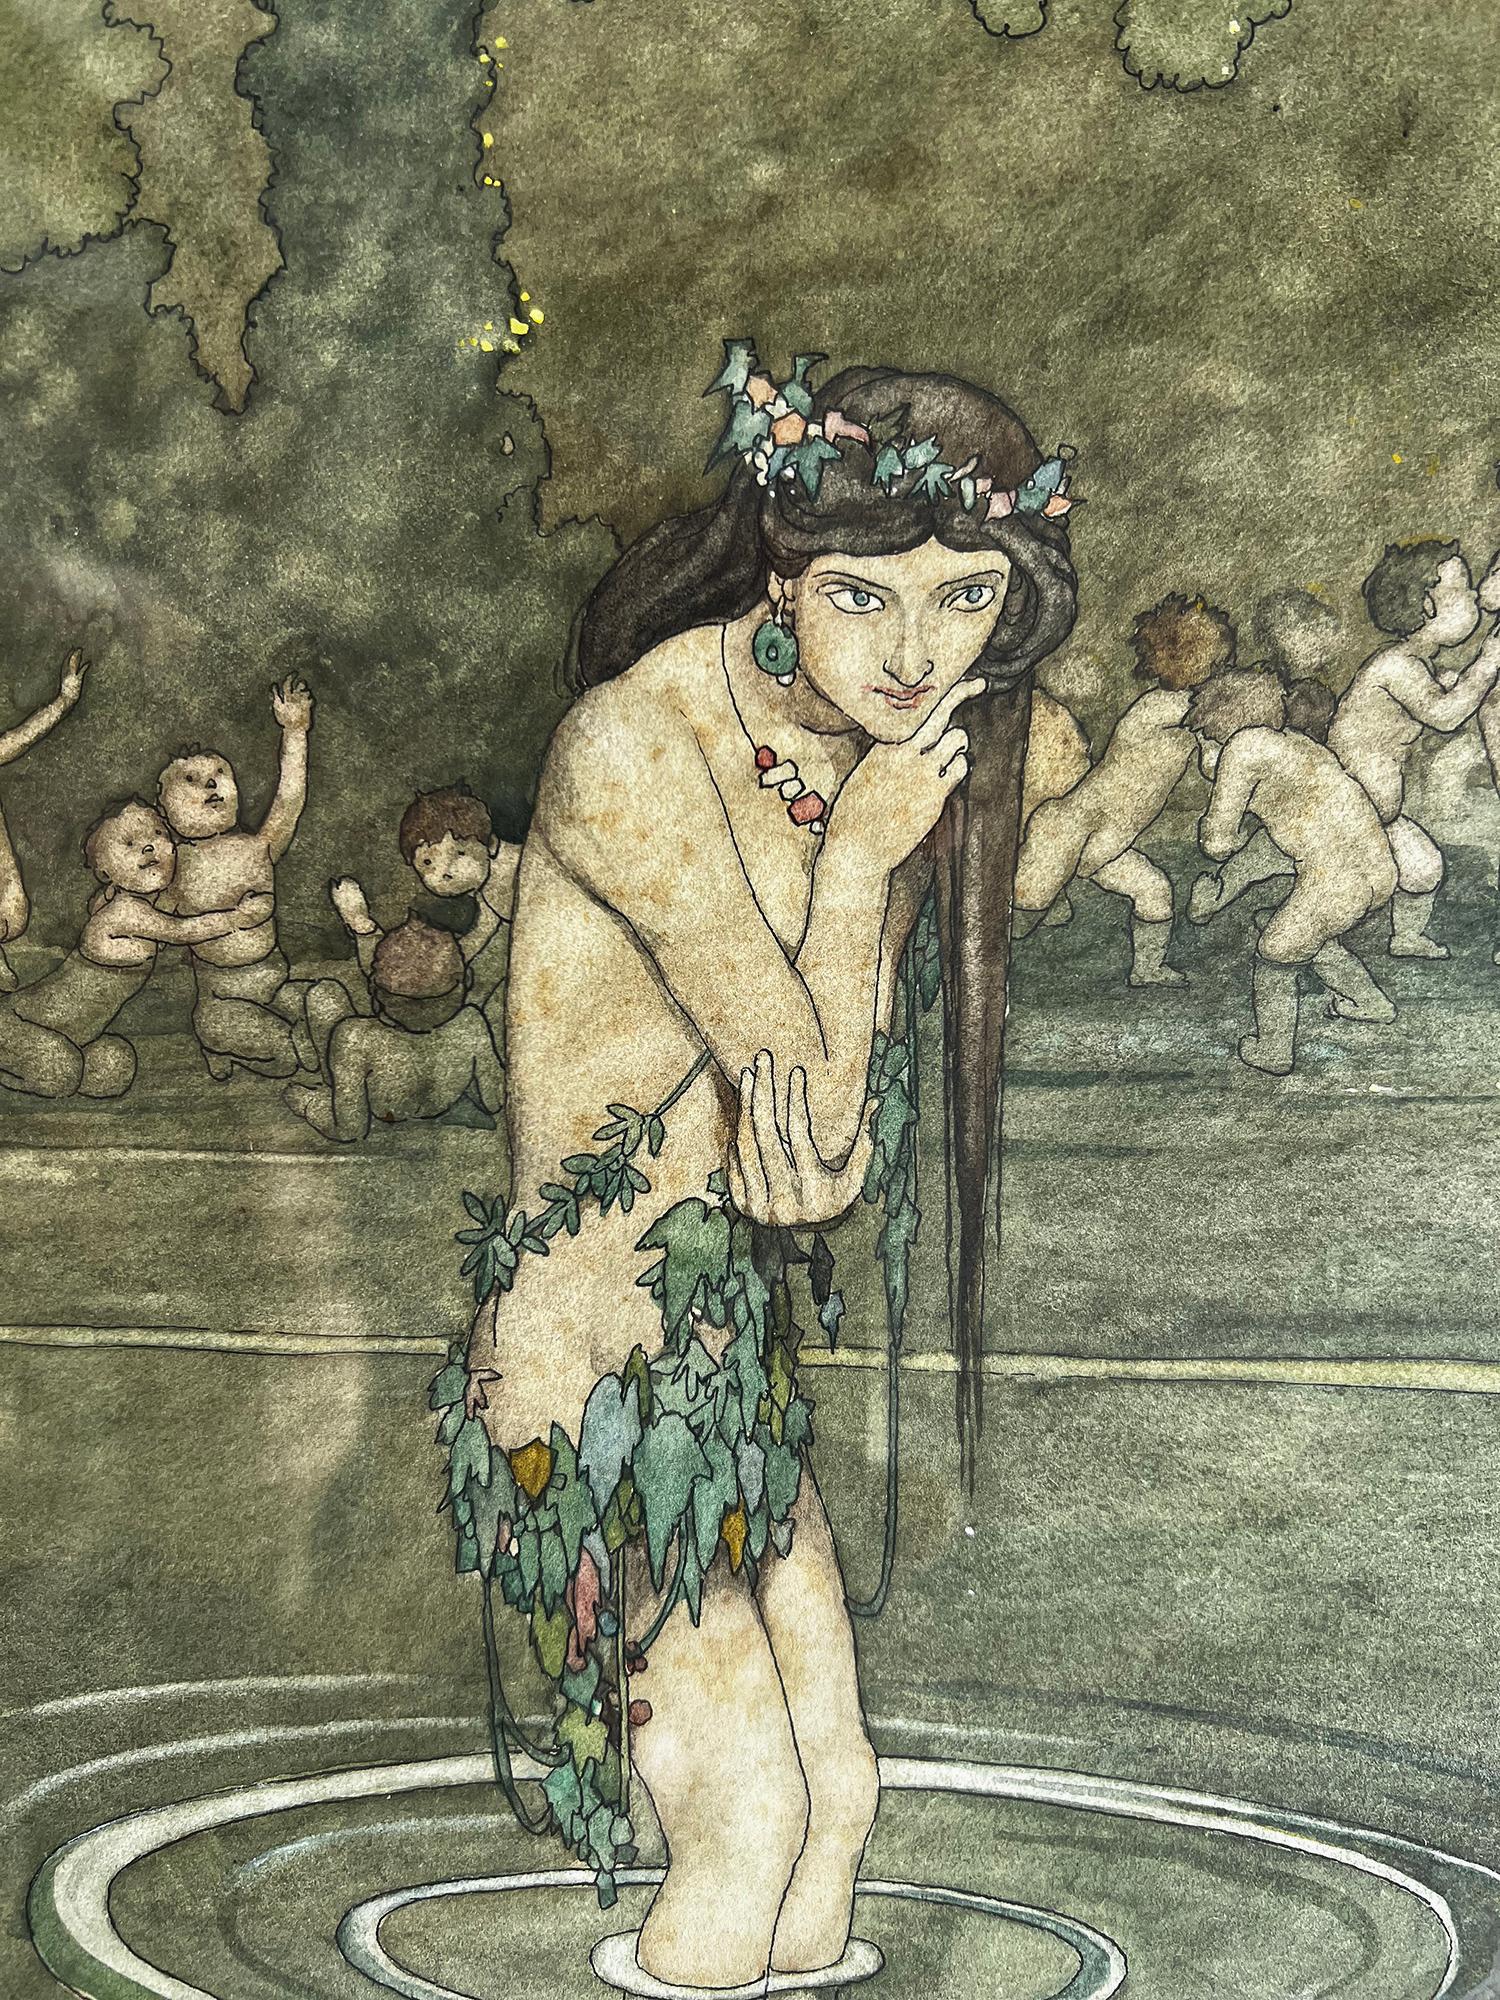 The Kelpie of Snooziepool  - William Heath Robinson illustrated this whimsical fantasy work featuring a semi-nude beauty in a pool of water with children. 
Based on the Metropolitan Museum's work of the same theme - 